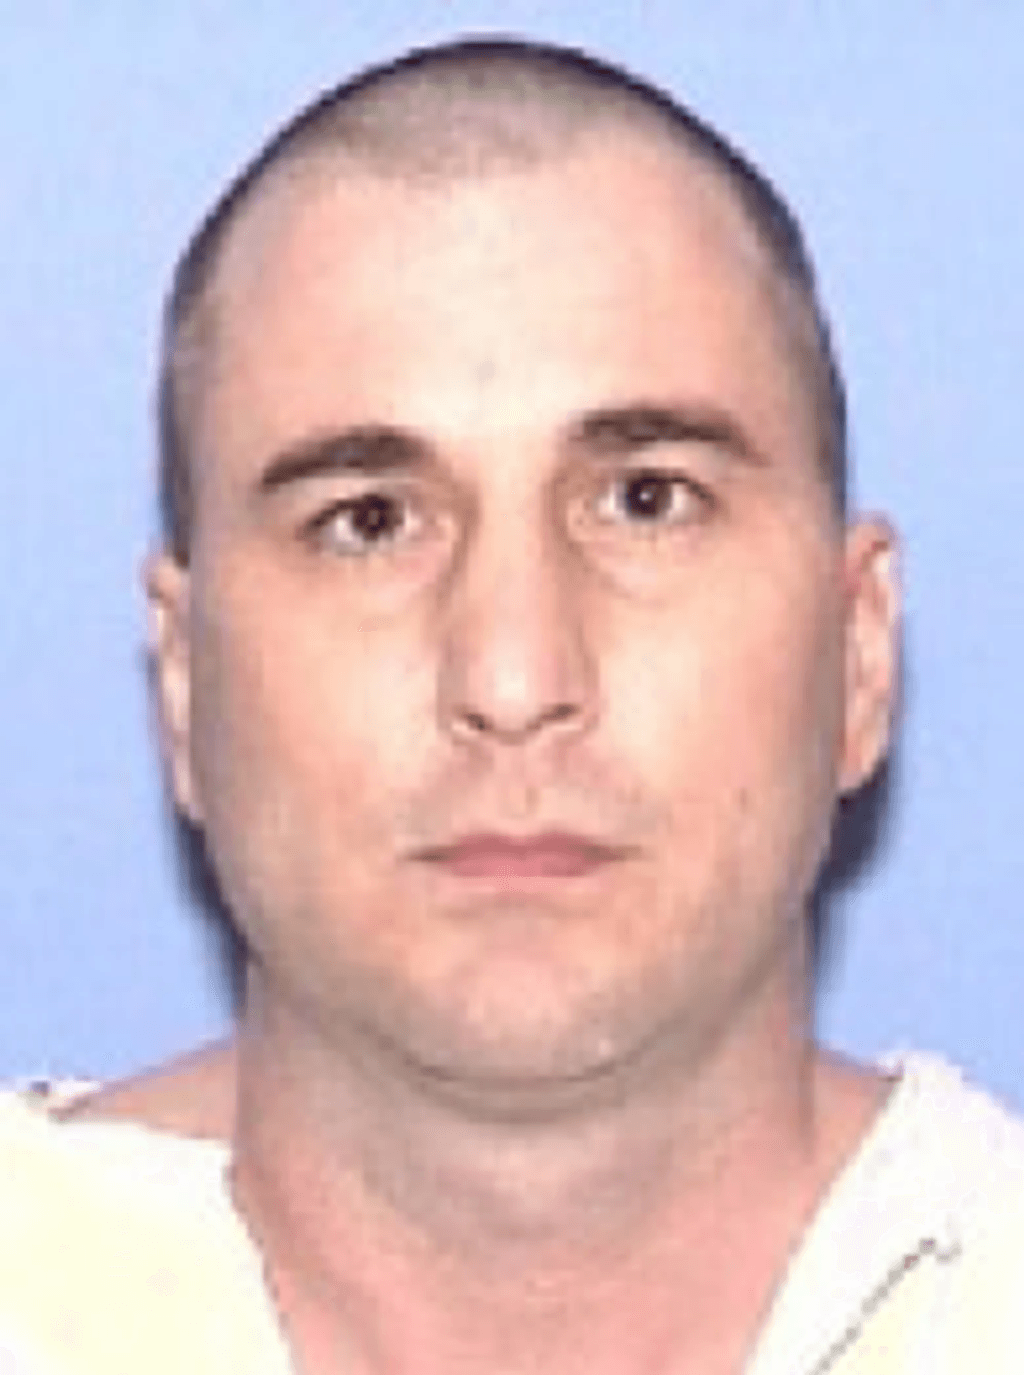 Texas Federal Court Stays Execution of Stephen Barbee on Religious Freedom Issue, Defense Seeks Review of False Forensic Testimony